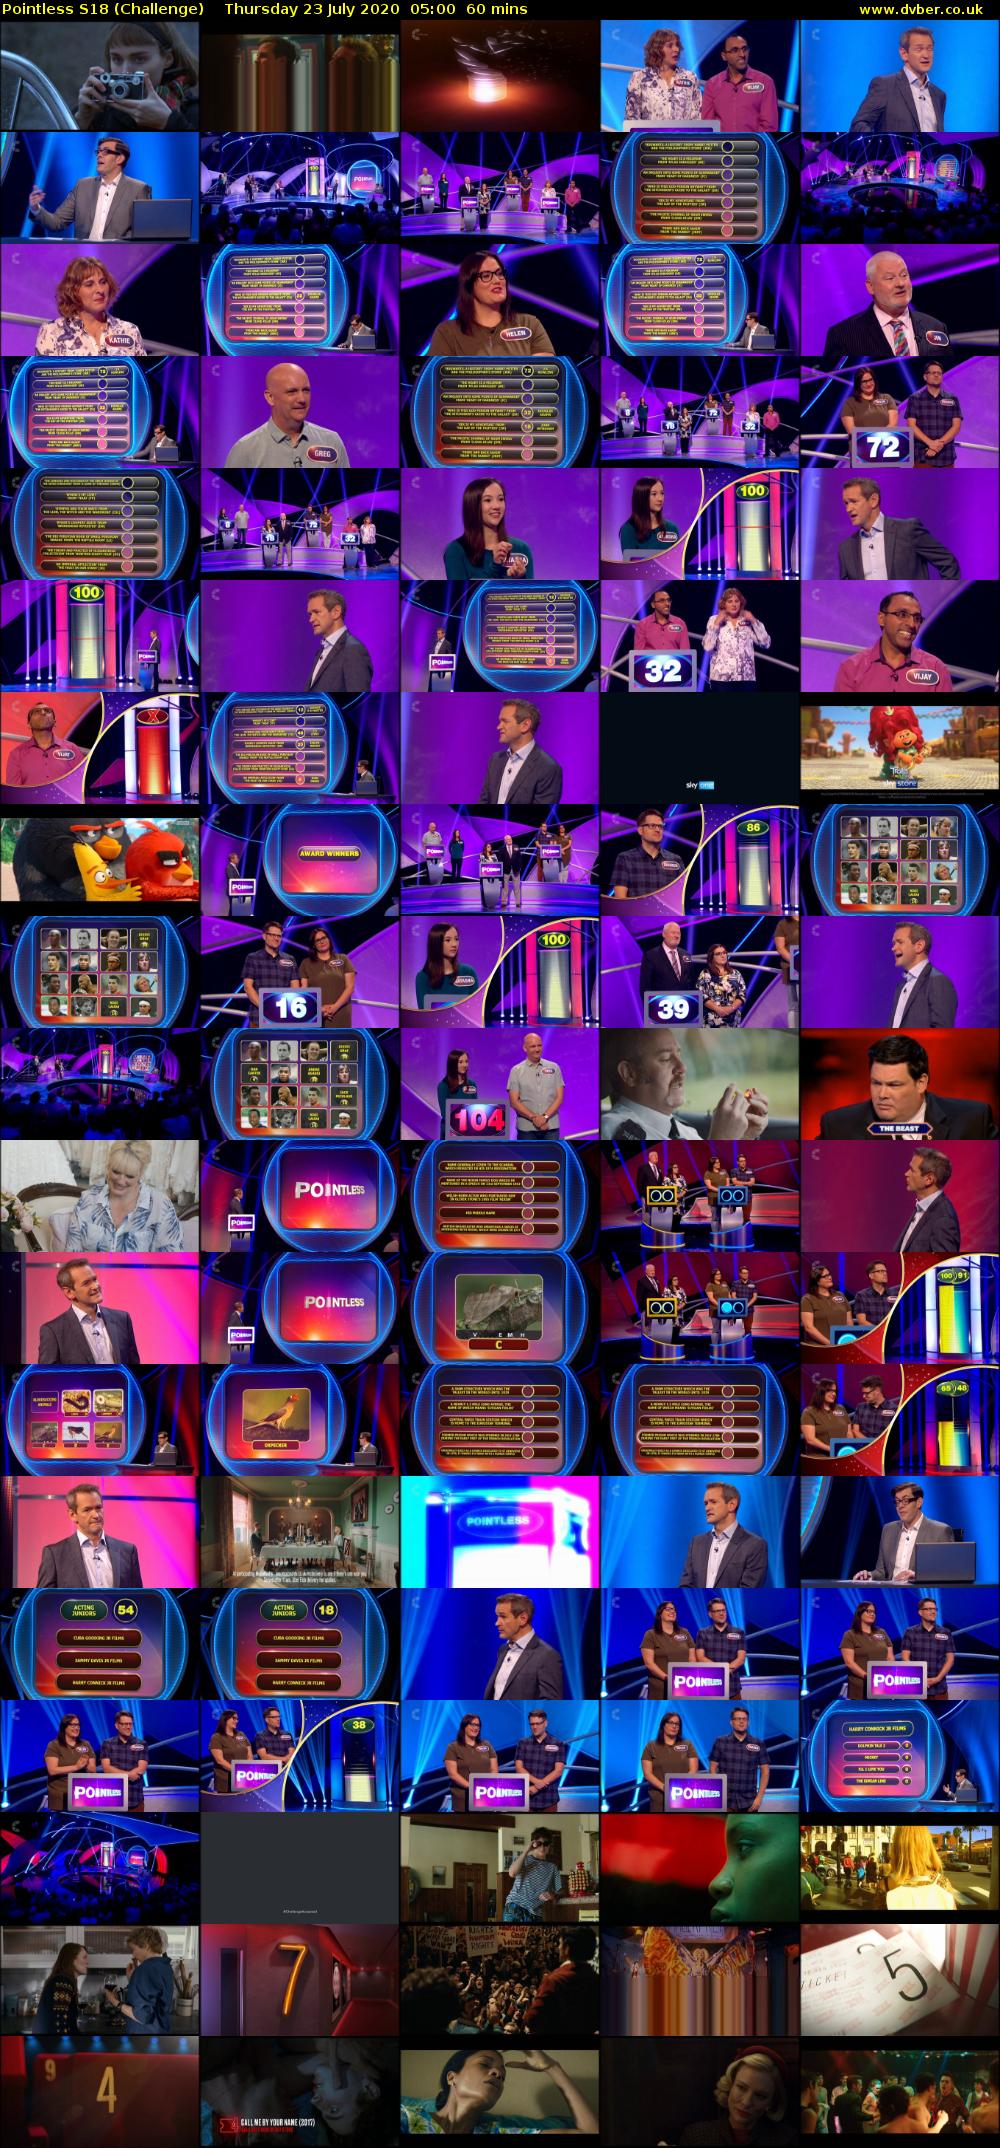 Pointless S18 (Challenge) Thursday 23 July 2020 05:00 - 06:00